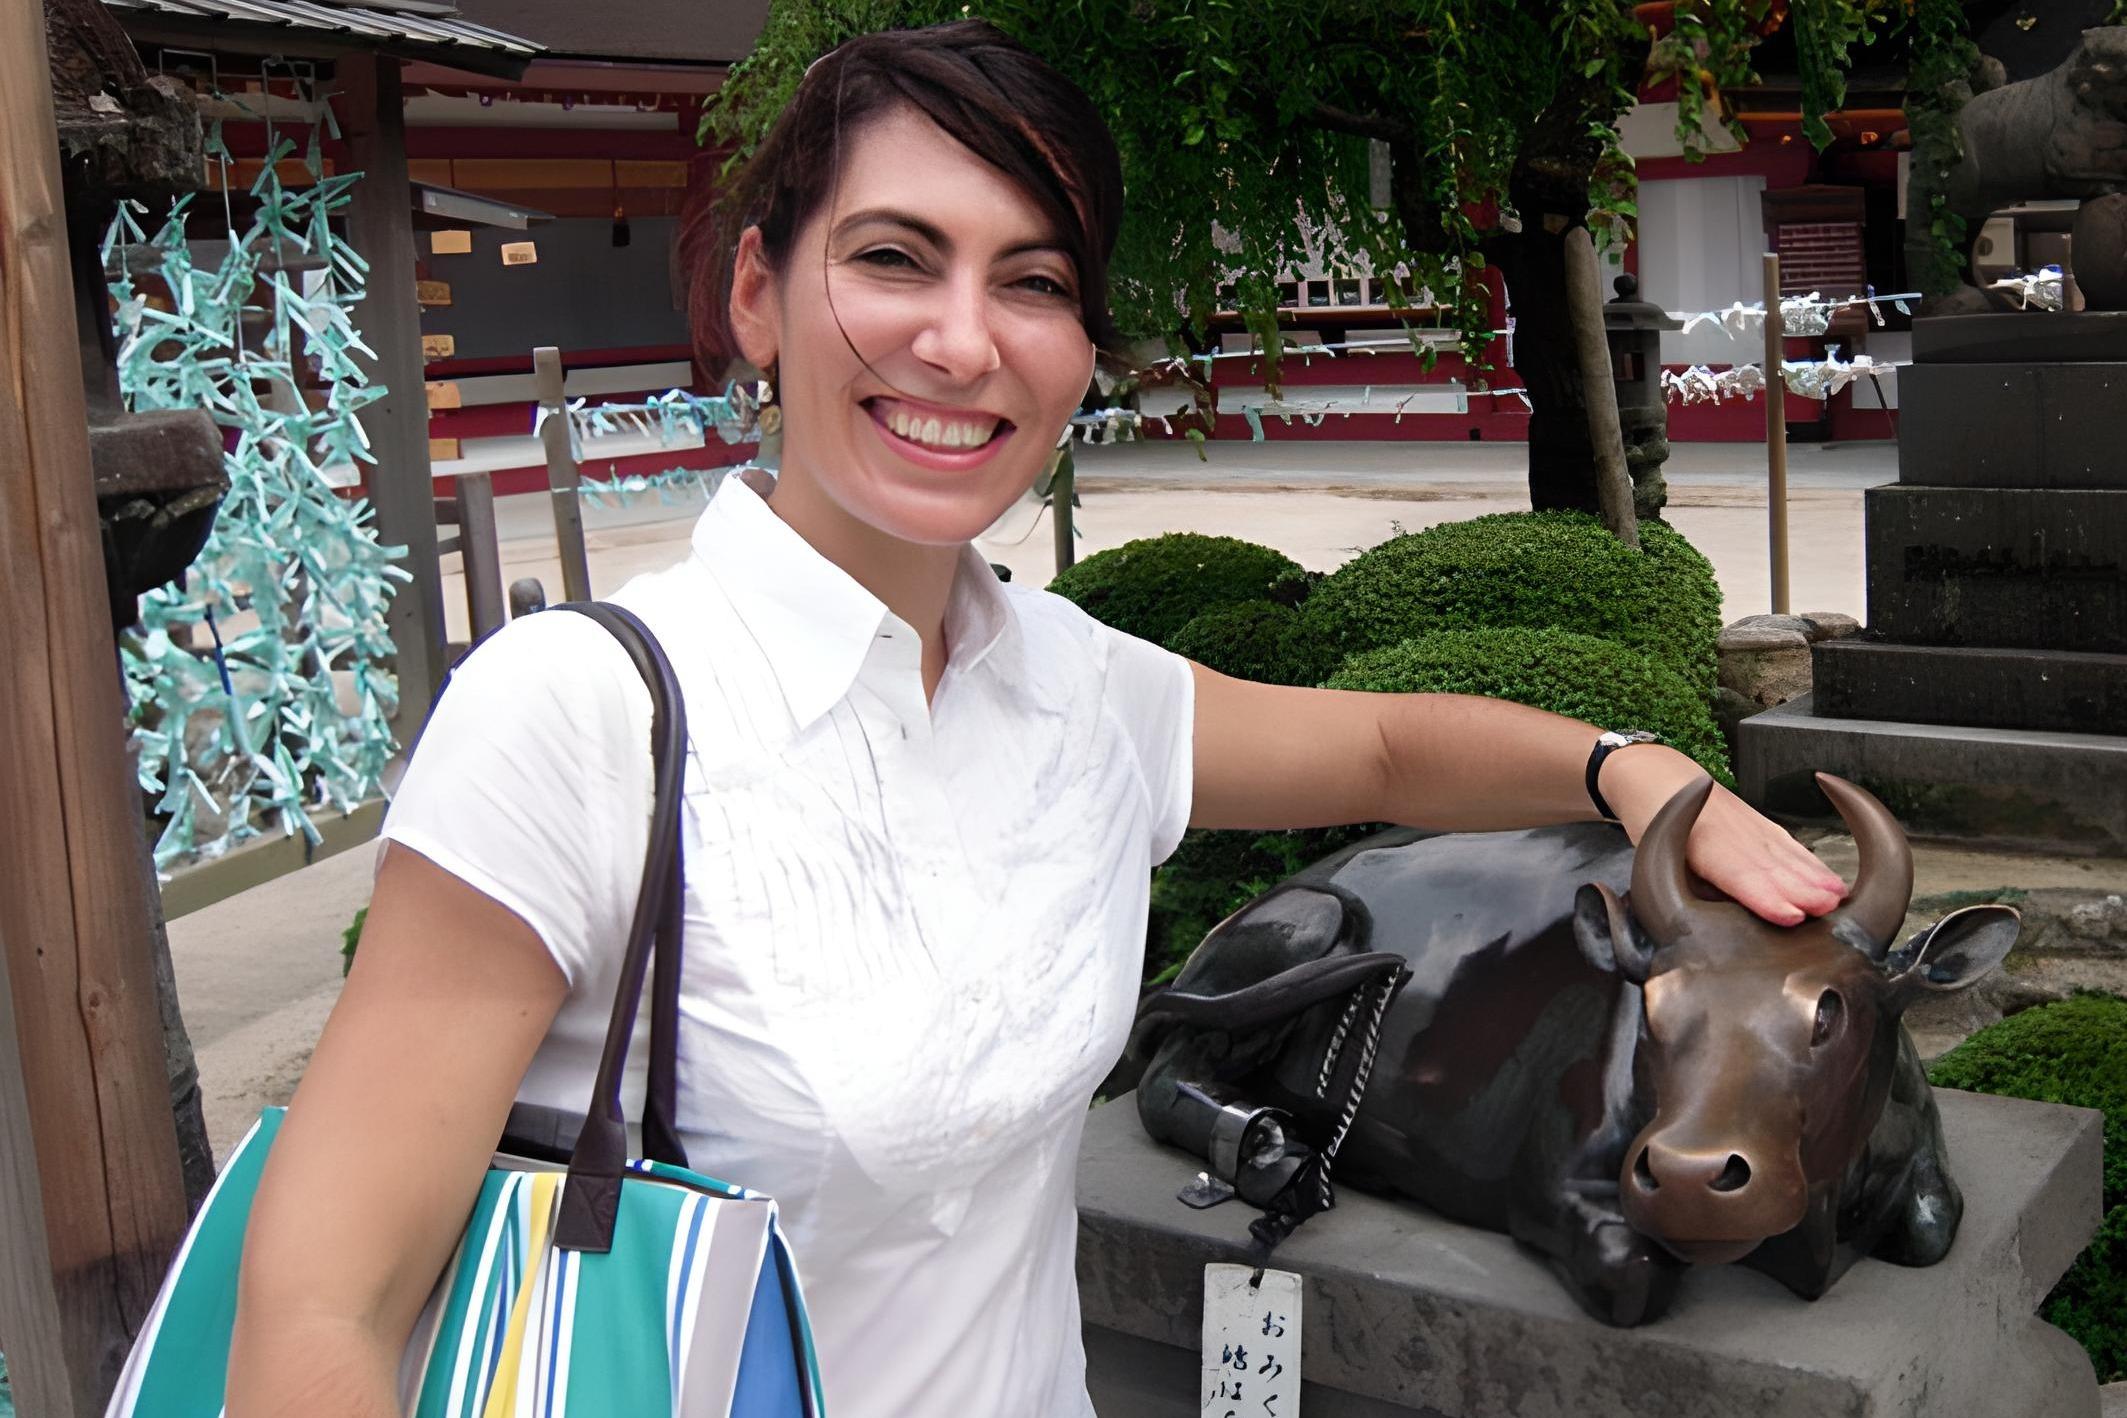 Dr. Alicia Volk poses with a cow statue during her Fulbright in Japan.